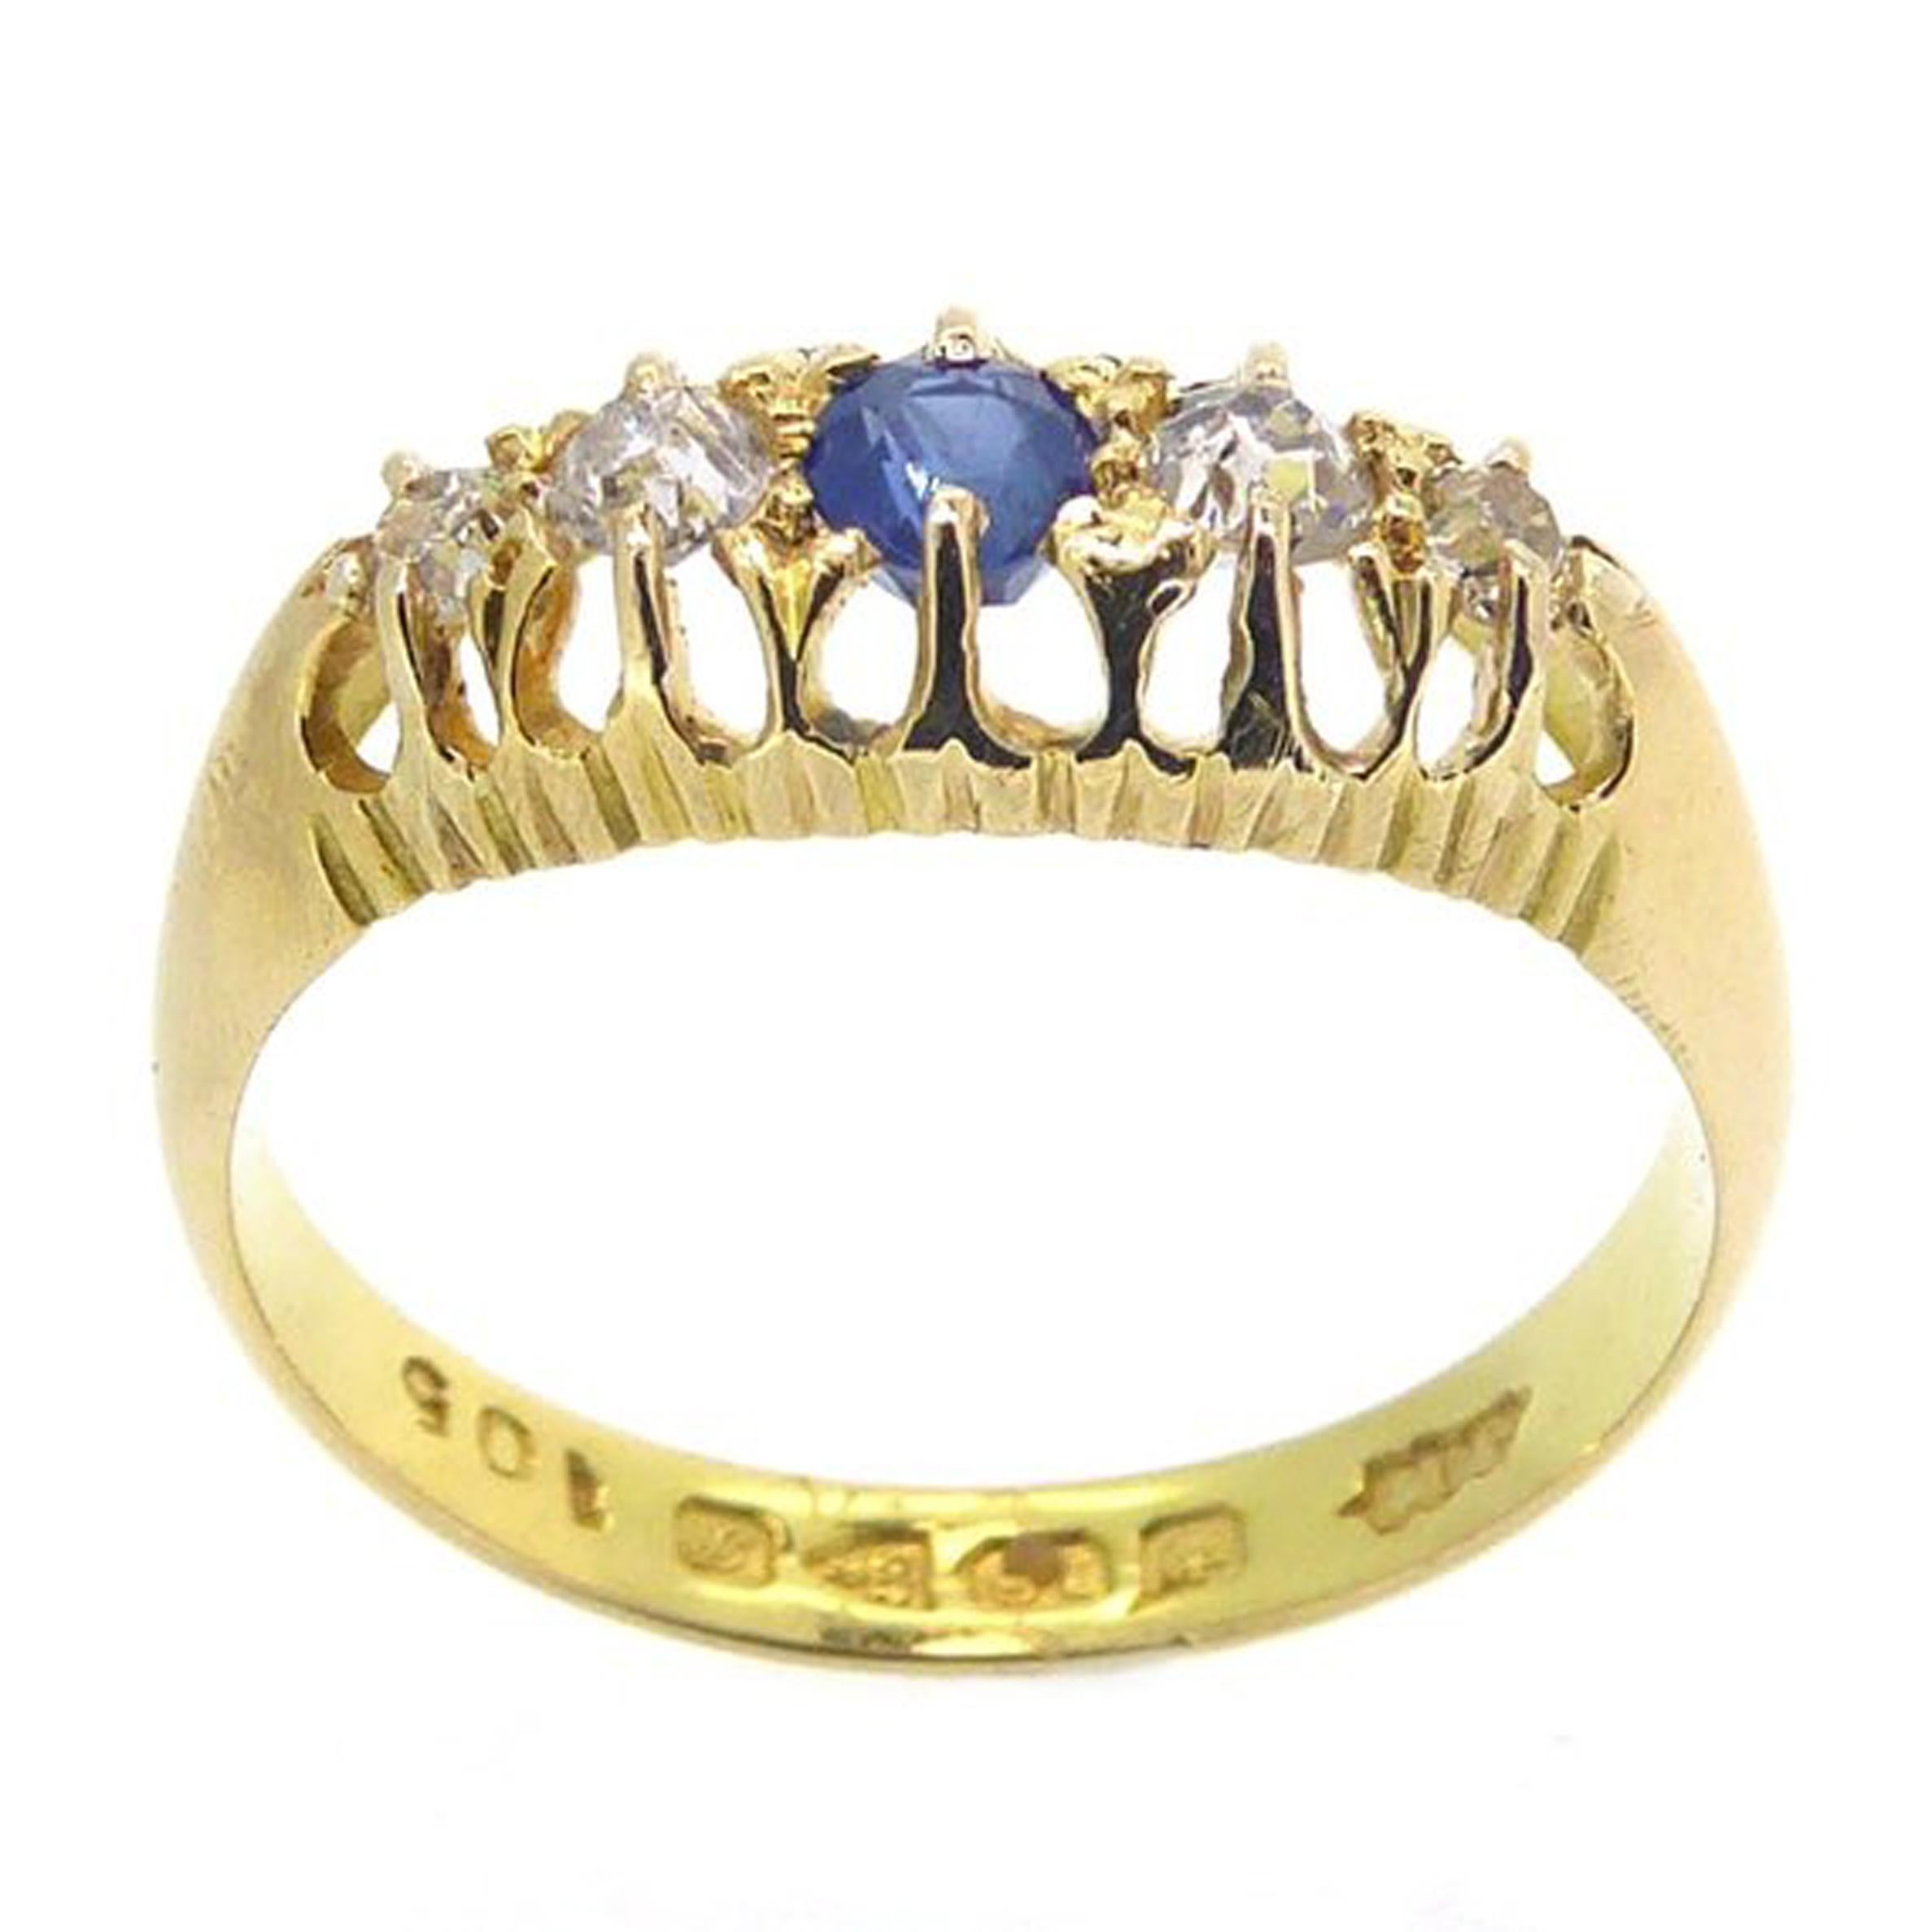 George V Antique Sapphire and Diamond Ring Hallmarked Chester, 1915